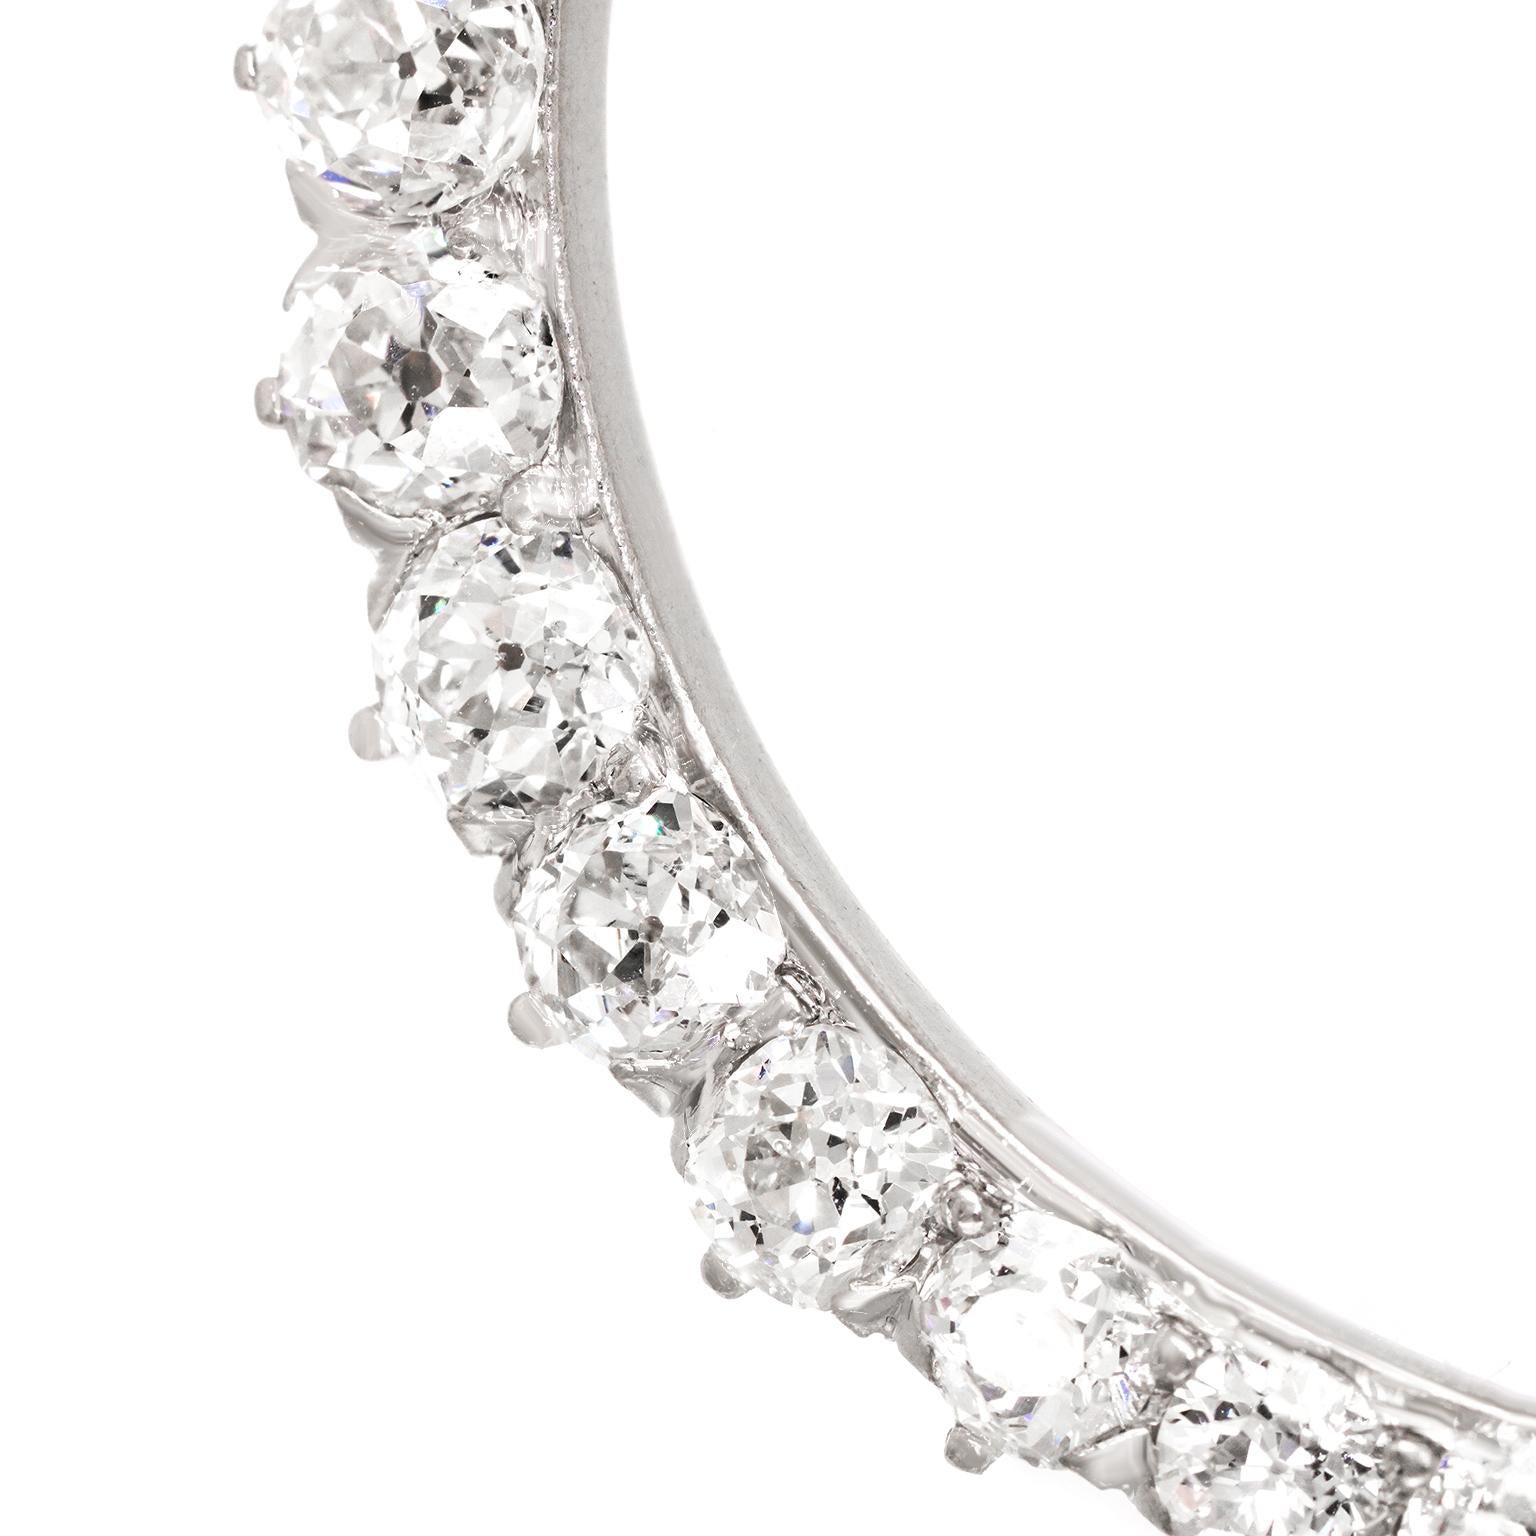 Diamond-set Platinum Crescent Moon Brooch by Barthman New York In Excellent Condition For Sale In Litchfield, CT